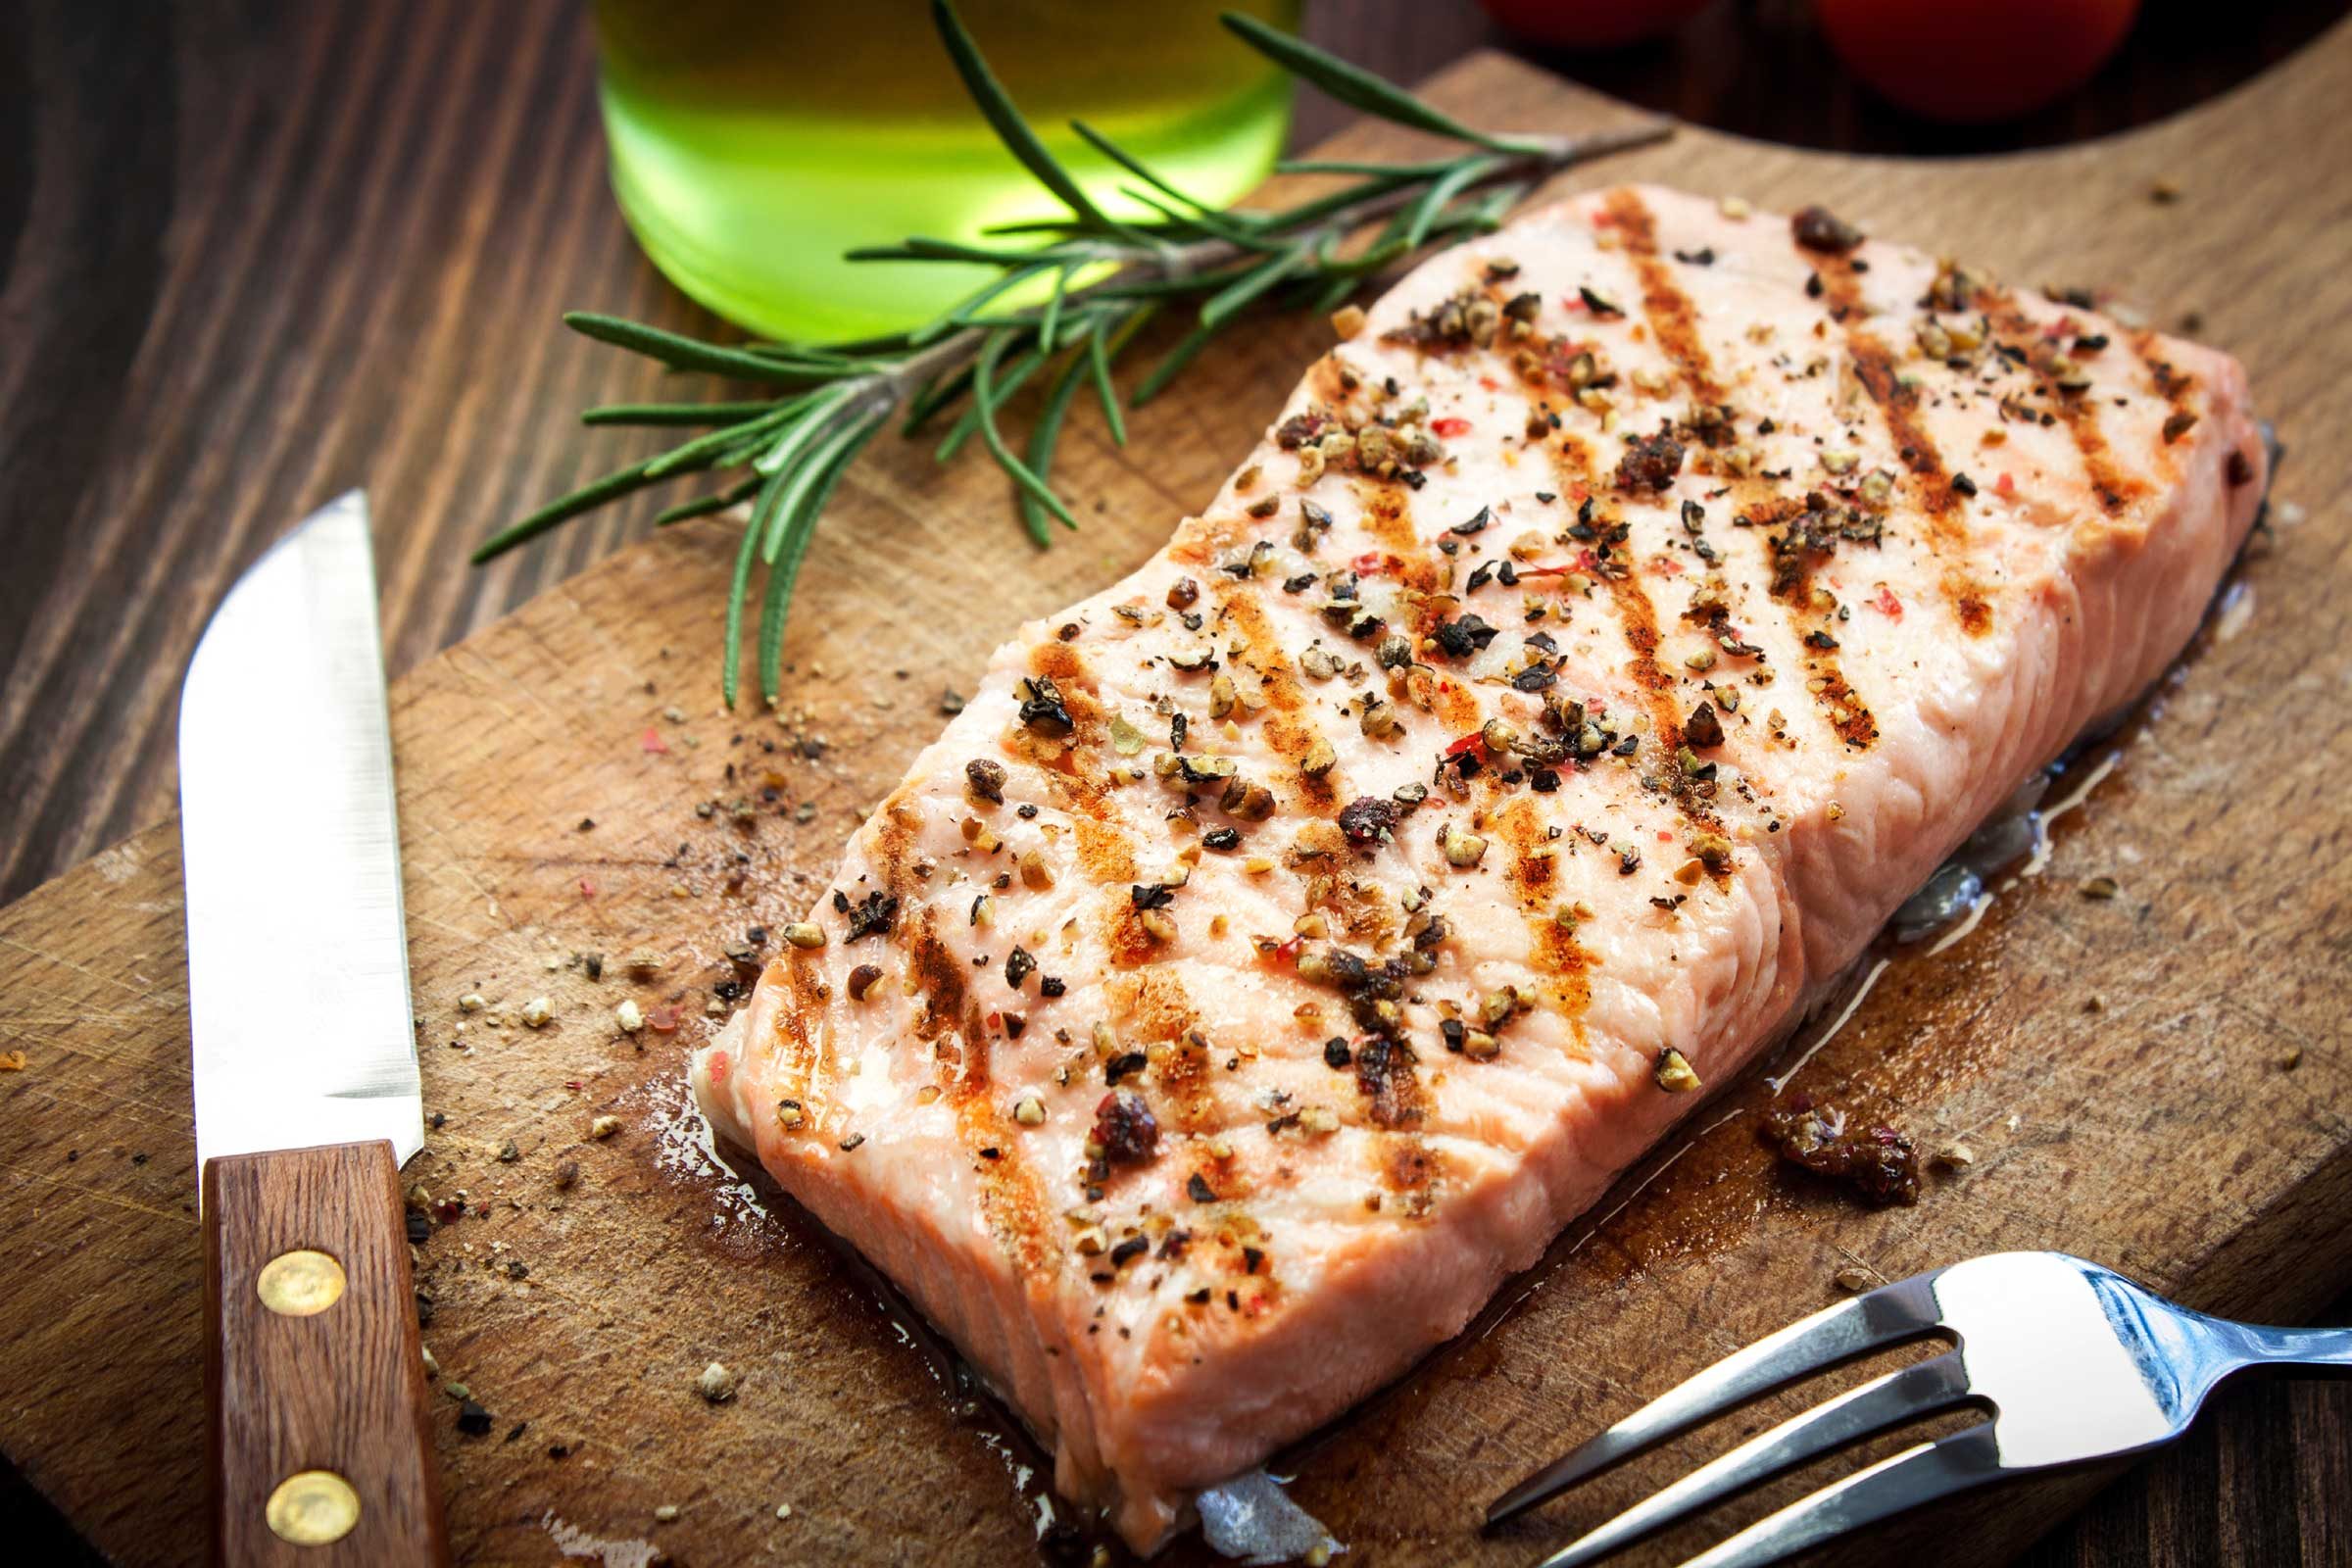 Throw some salmon on the grill tonight